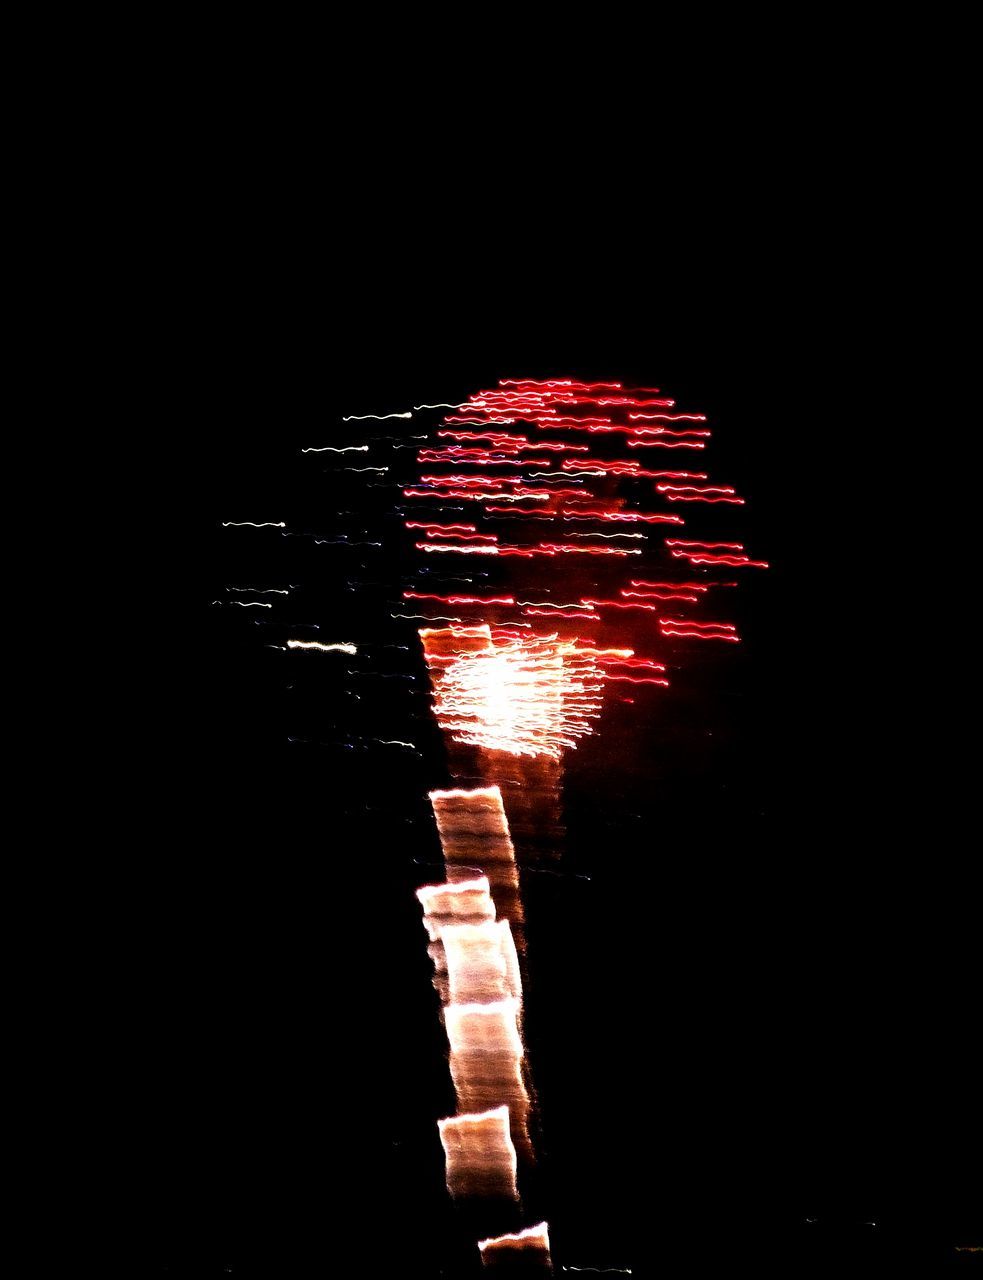 night, illuminated, glowing, red, low angle view, dark, arts culture and entertainment, motion, lighting equipment, lit, no people, light, black background, outdoors, firework, sky, close-up